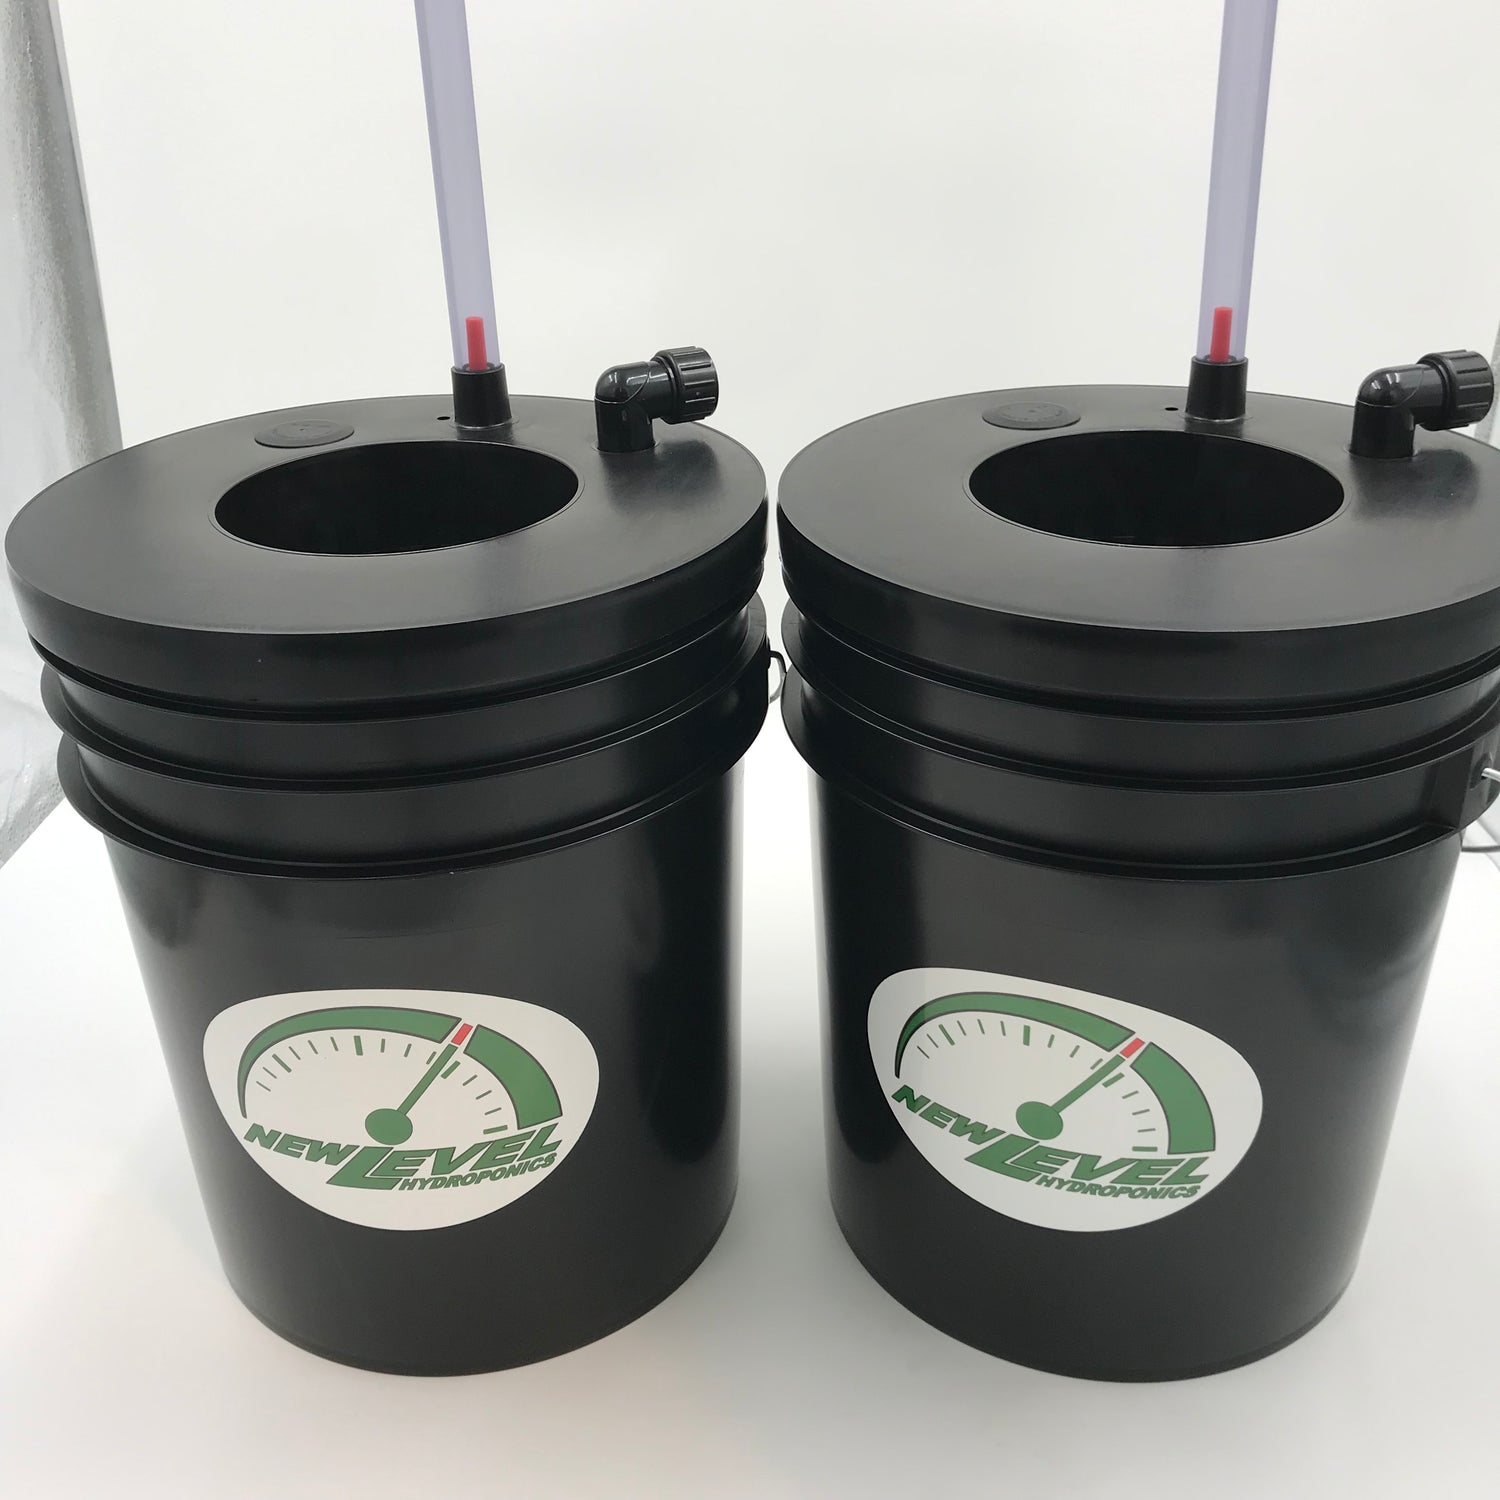 NEW LEVEL HYDRO  - Buckets and Grow Lids